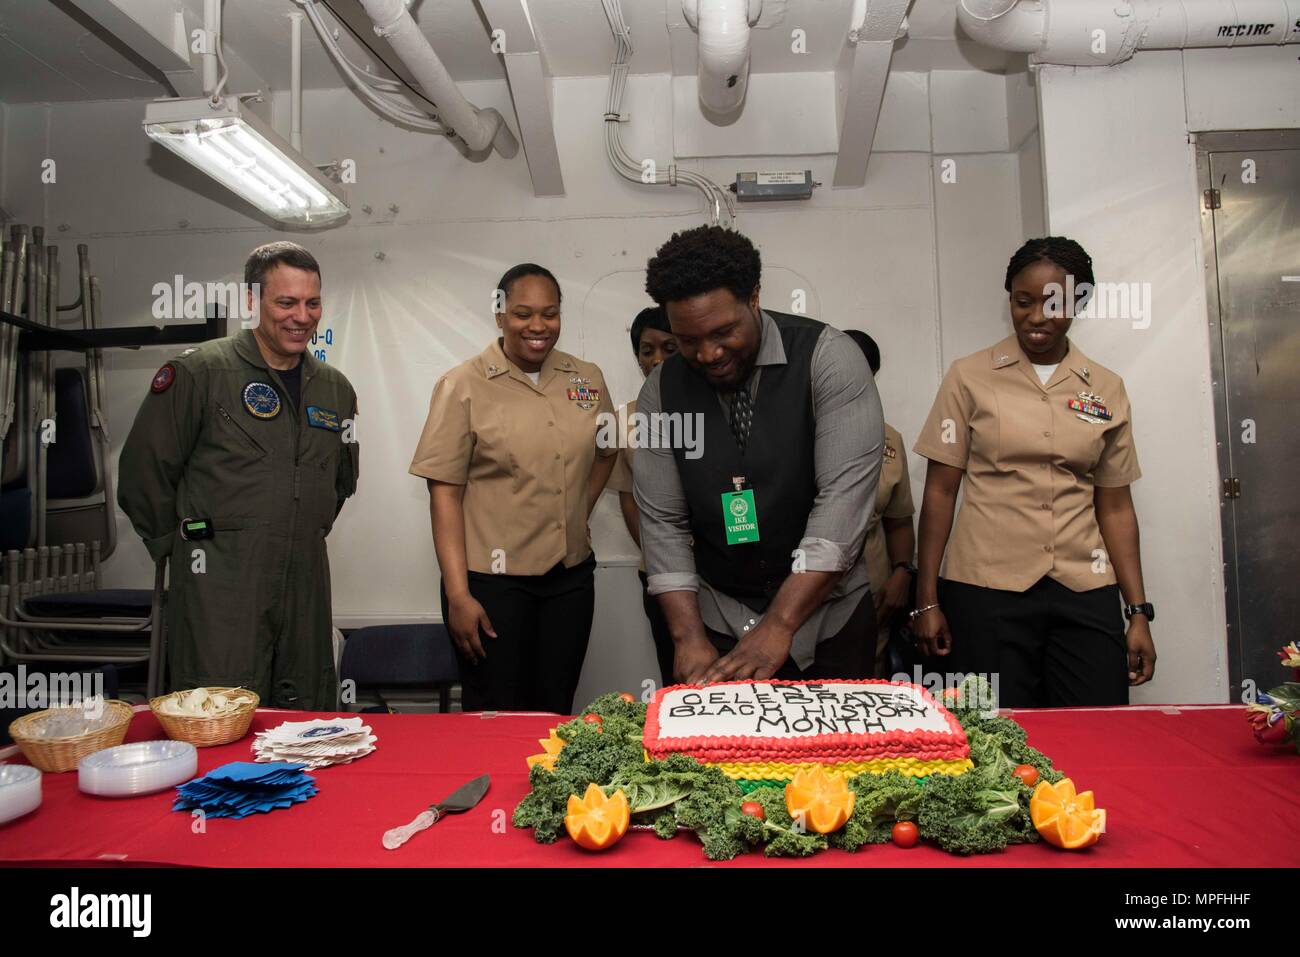 170228-N-KJ380-073  NORFOLK, Va. (Feb. 28, 2017) Joseph Matthews, M.A., a guest speaker from the Columbia University Teachers College, cuts the cake for the aircraft carrier USS Dwight D. Eisenhower's (CVN 69) (Ike) Black History Month celebration in the Five-Star classroom aboard the aircraft carrier USS Dwight D. Eisenhower (CVN 69) (Ike). Ike is currently pier side during the sustainment phase of the Optimized Fleet Response Plan (OFRP). (U.S. Navy photo by Mass Communication Specialist Seaman Neo Greene III) Stock Photo